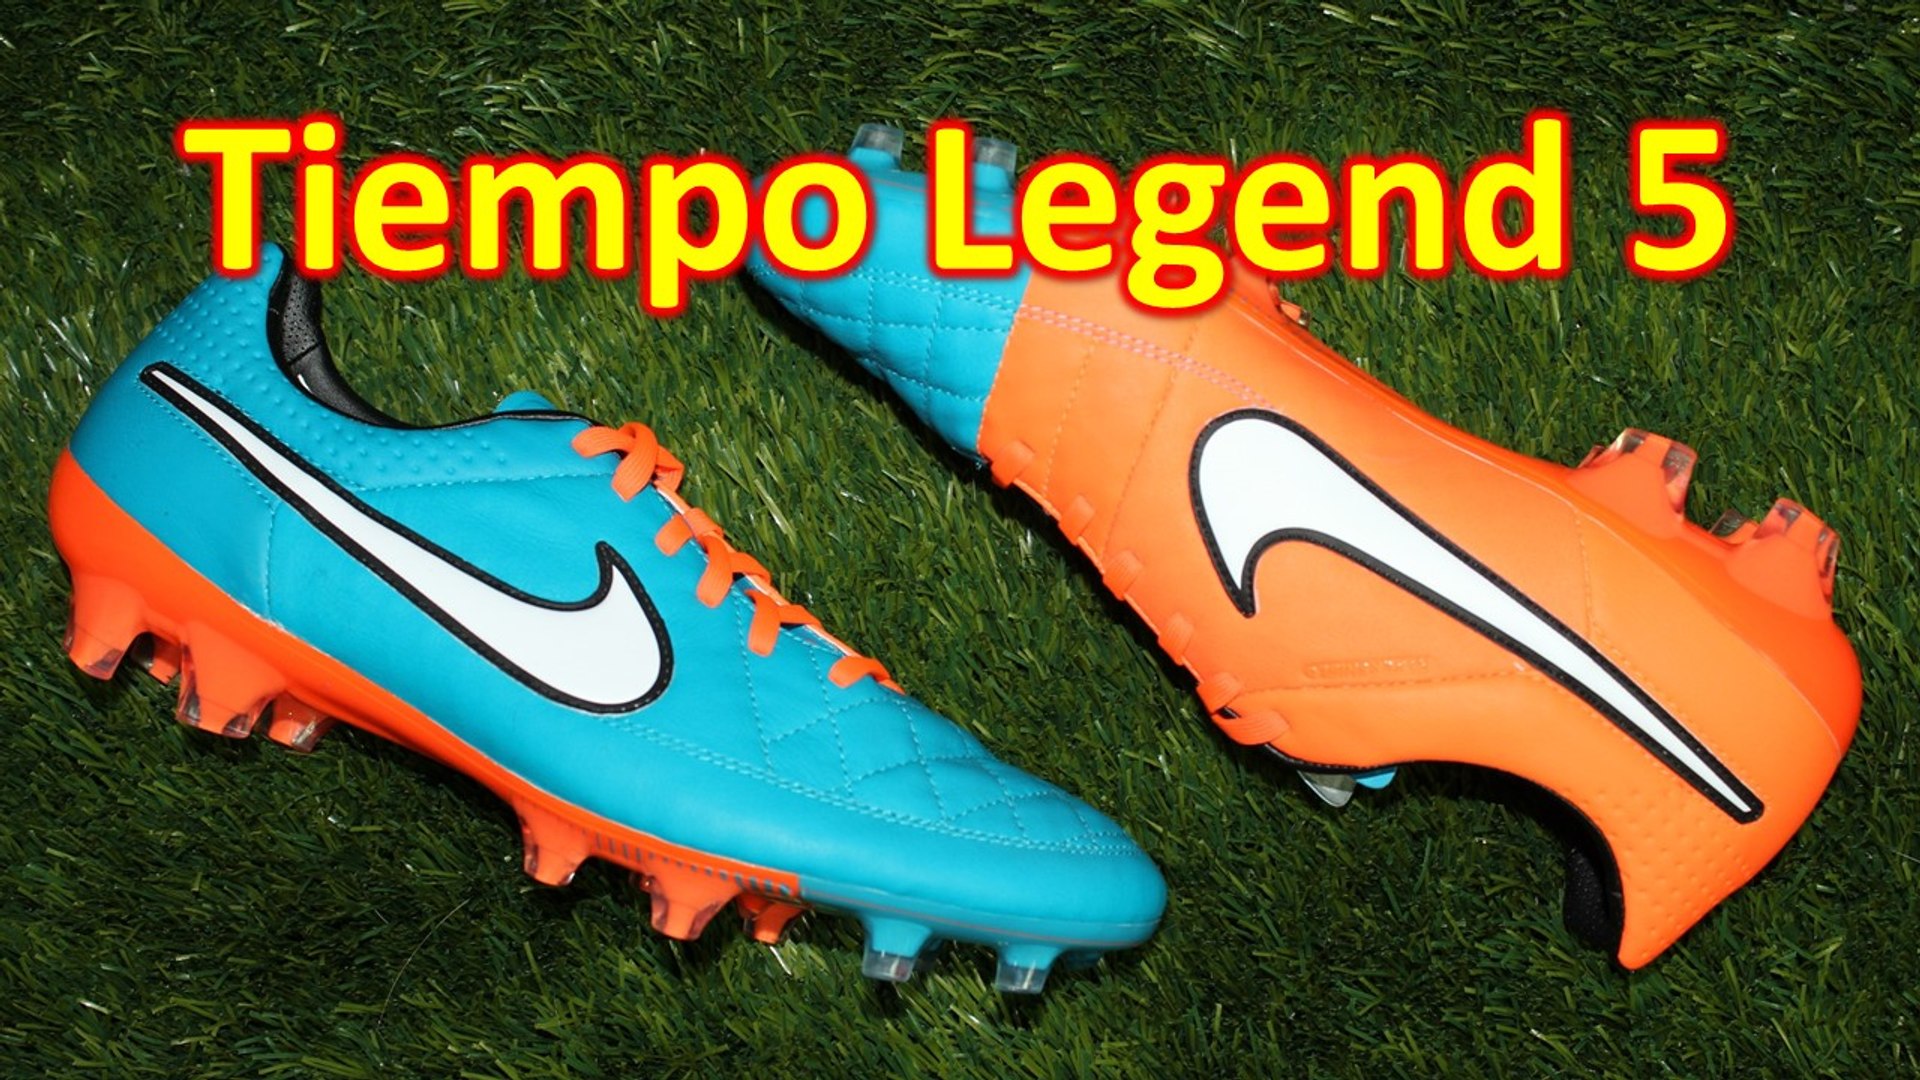 Nike Tiempo Legend 5 Neo Turquoise/Hyper Crimson - Review & On Feet - video  Dailymotion